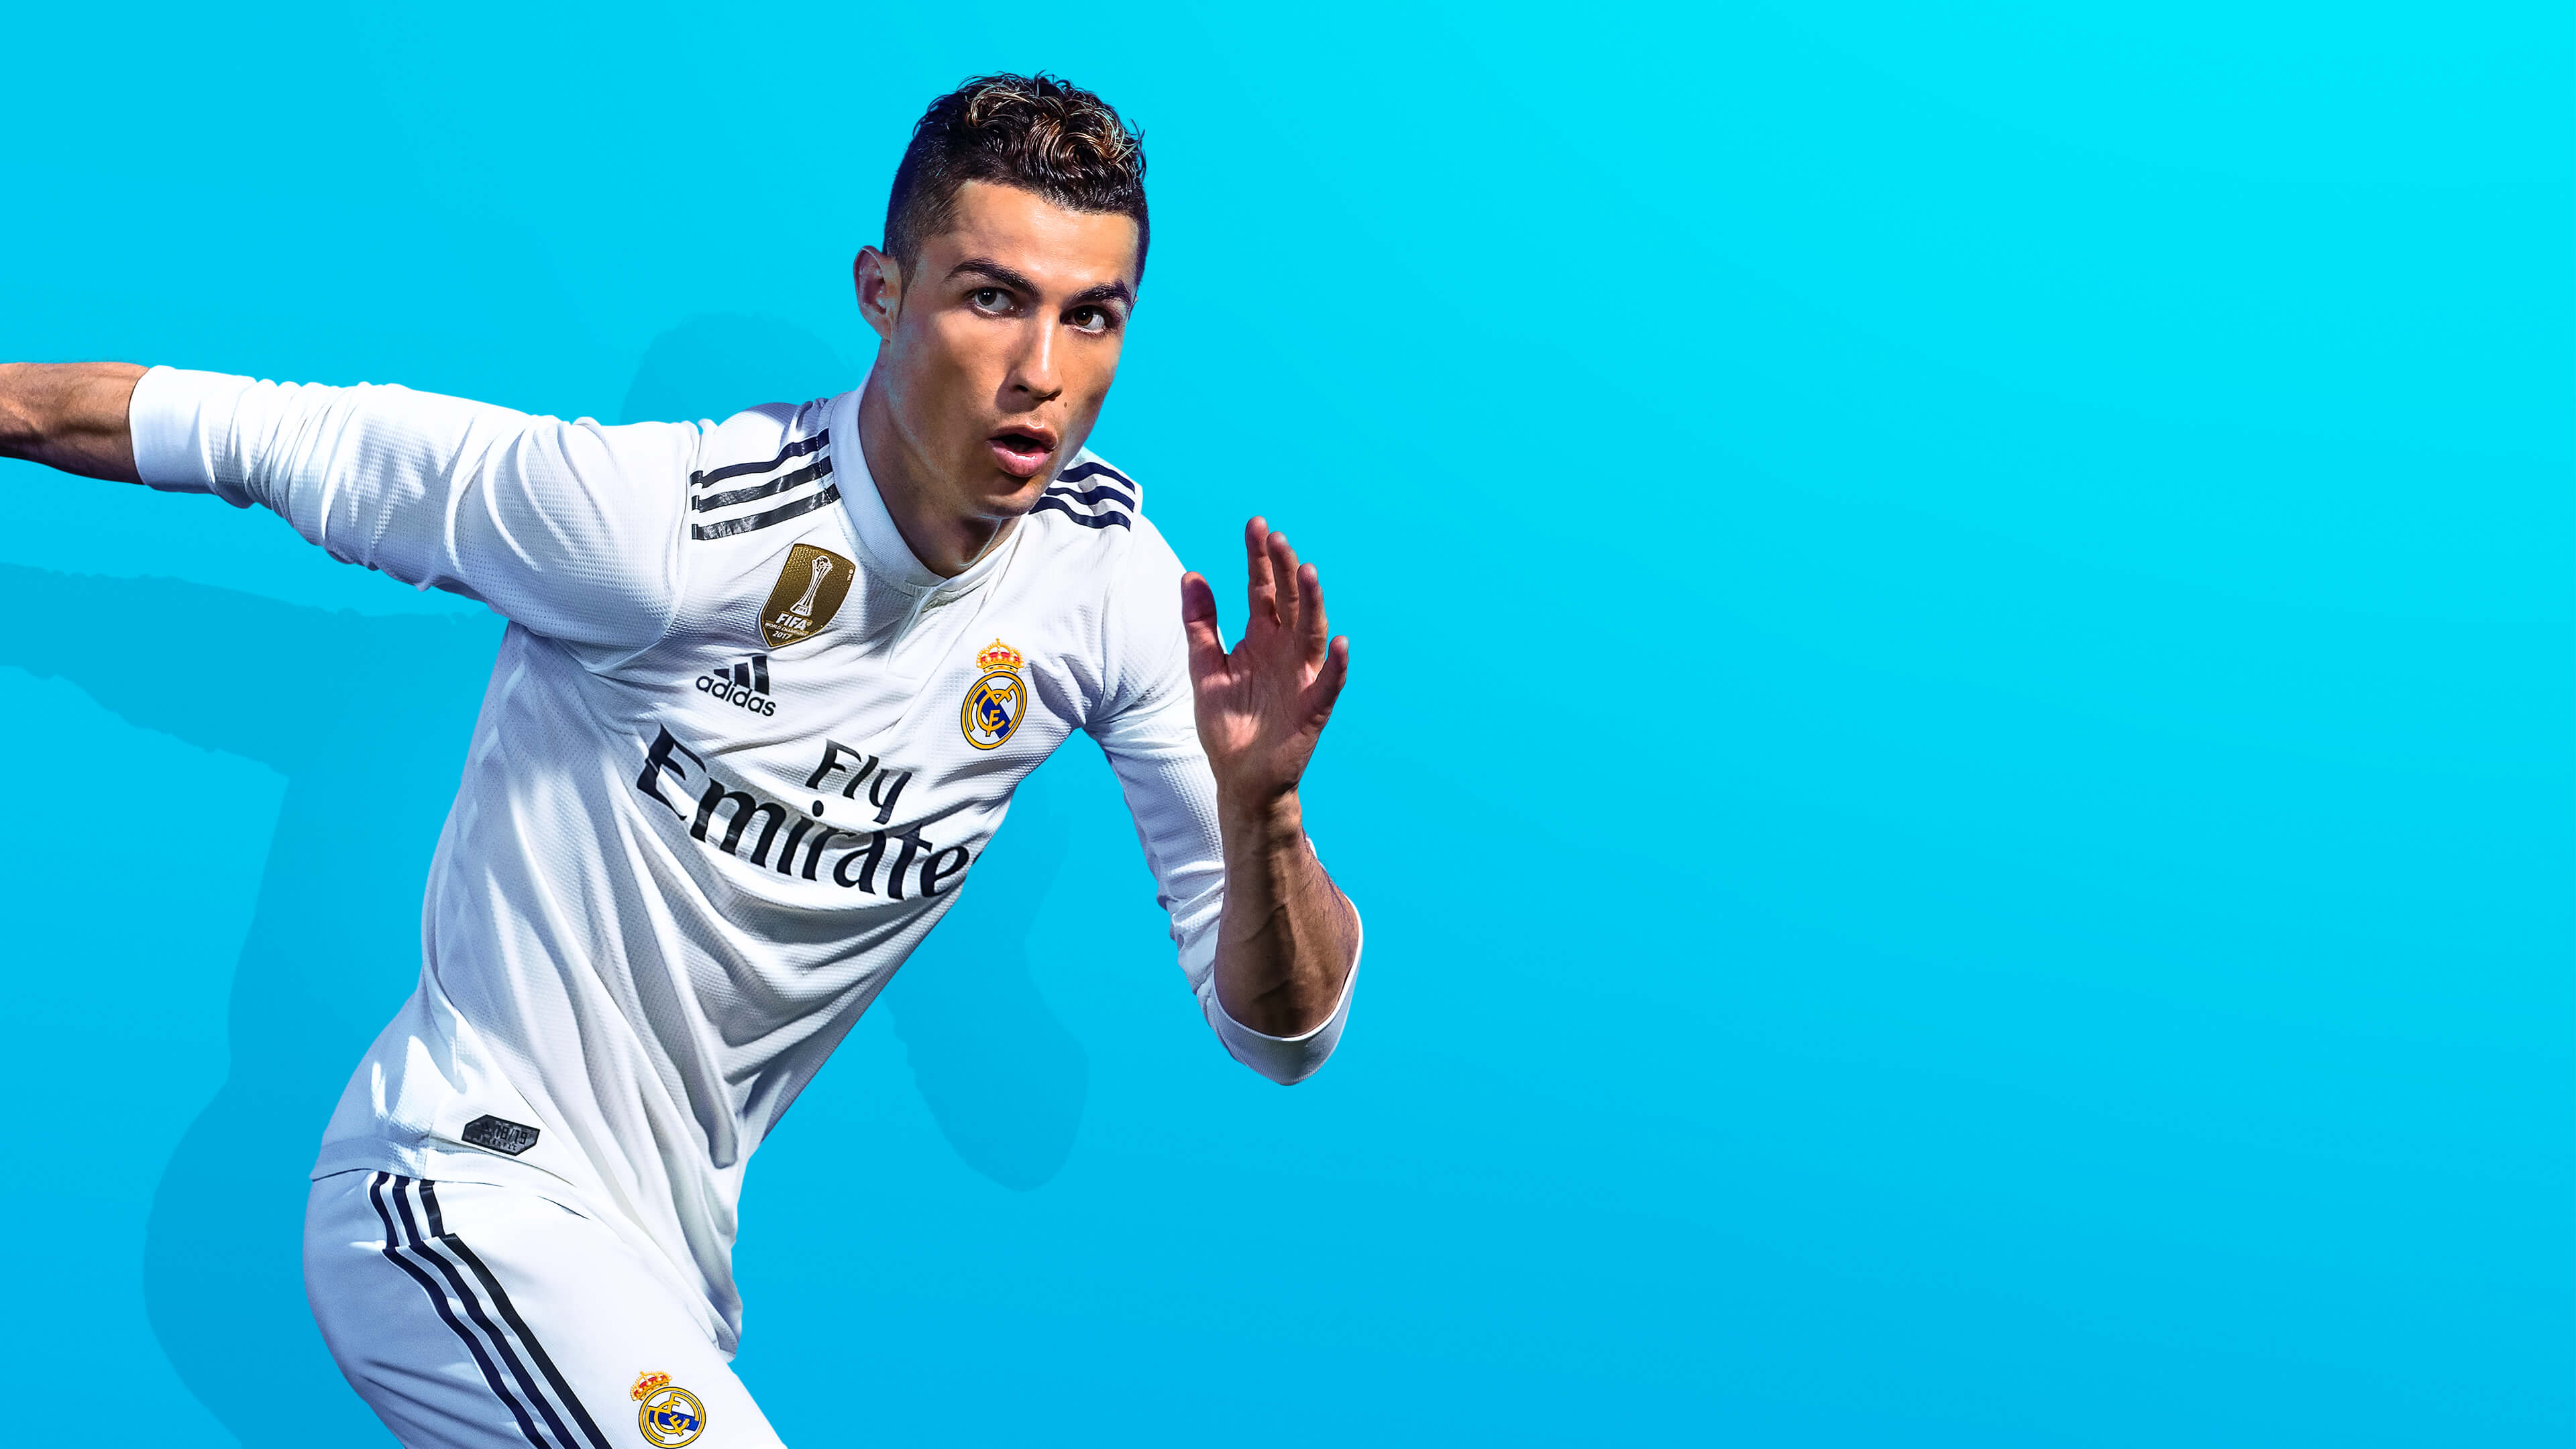 FIFA 19 HD Wallpapers and Backgrounds